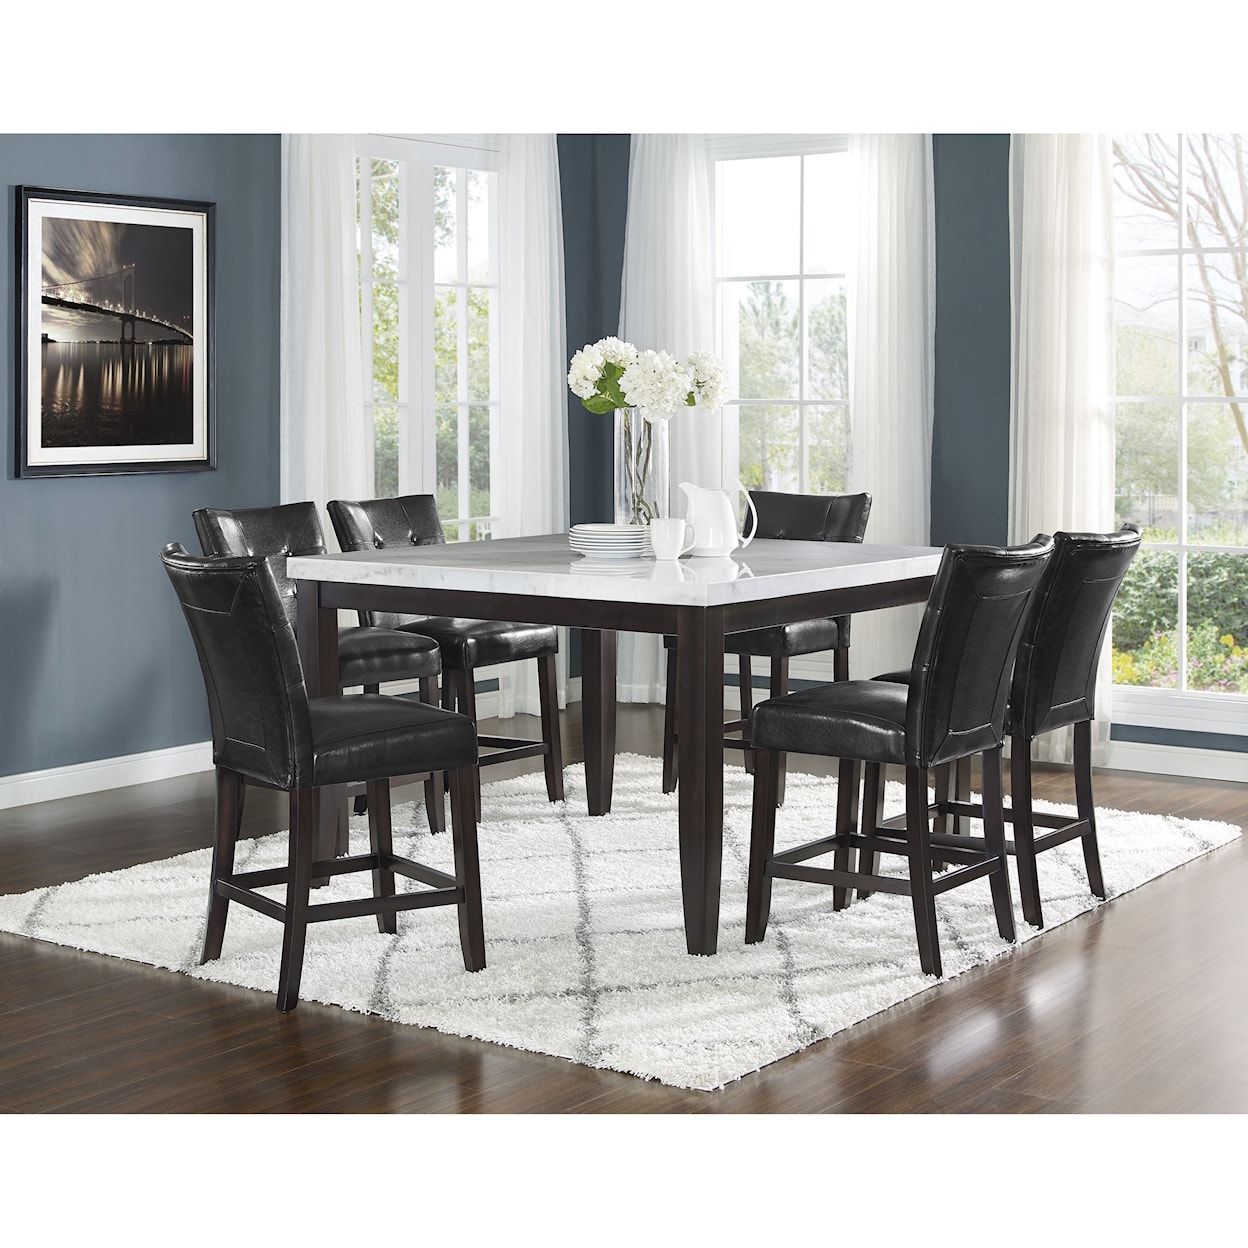 Steve Silver Francis Counter Height Dining Table